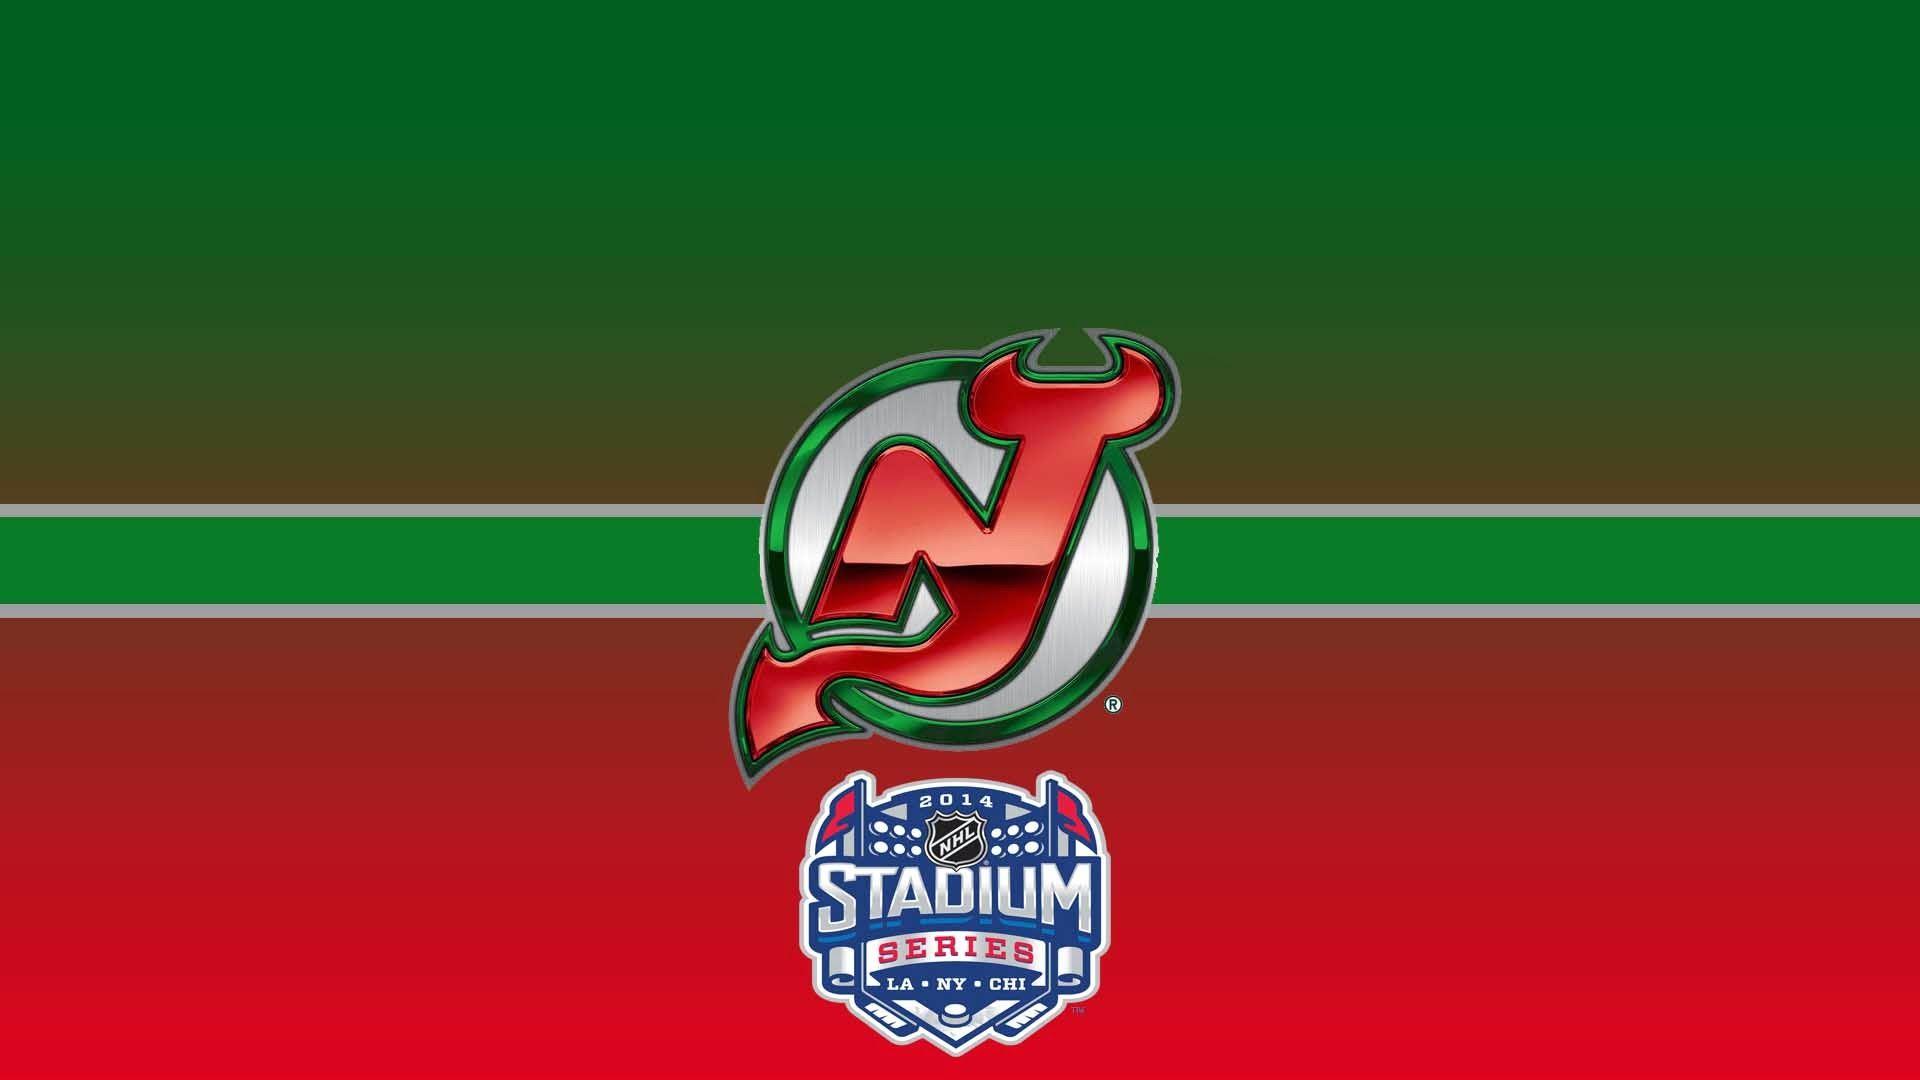 Wallpaper Red, Logo, NHL, New Jersey, New Jersey, Devils, Devils, Hockey  club images for desktop, section спорт - download